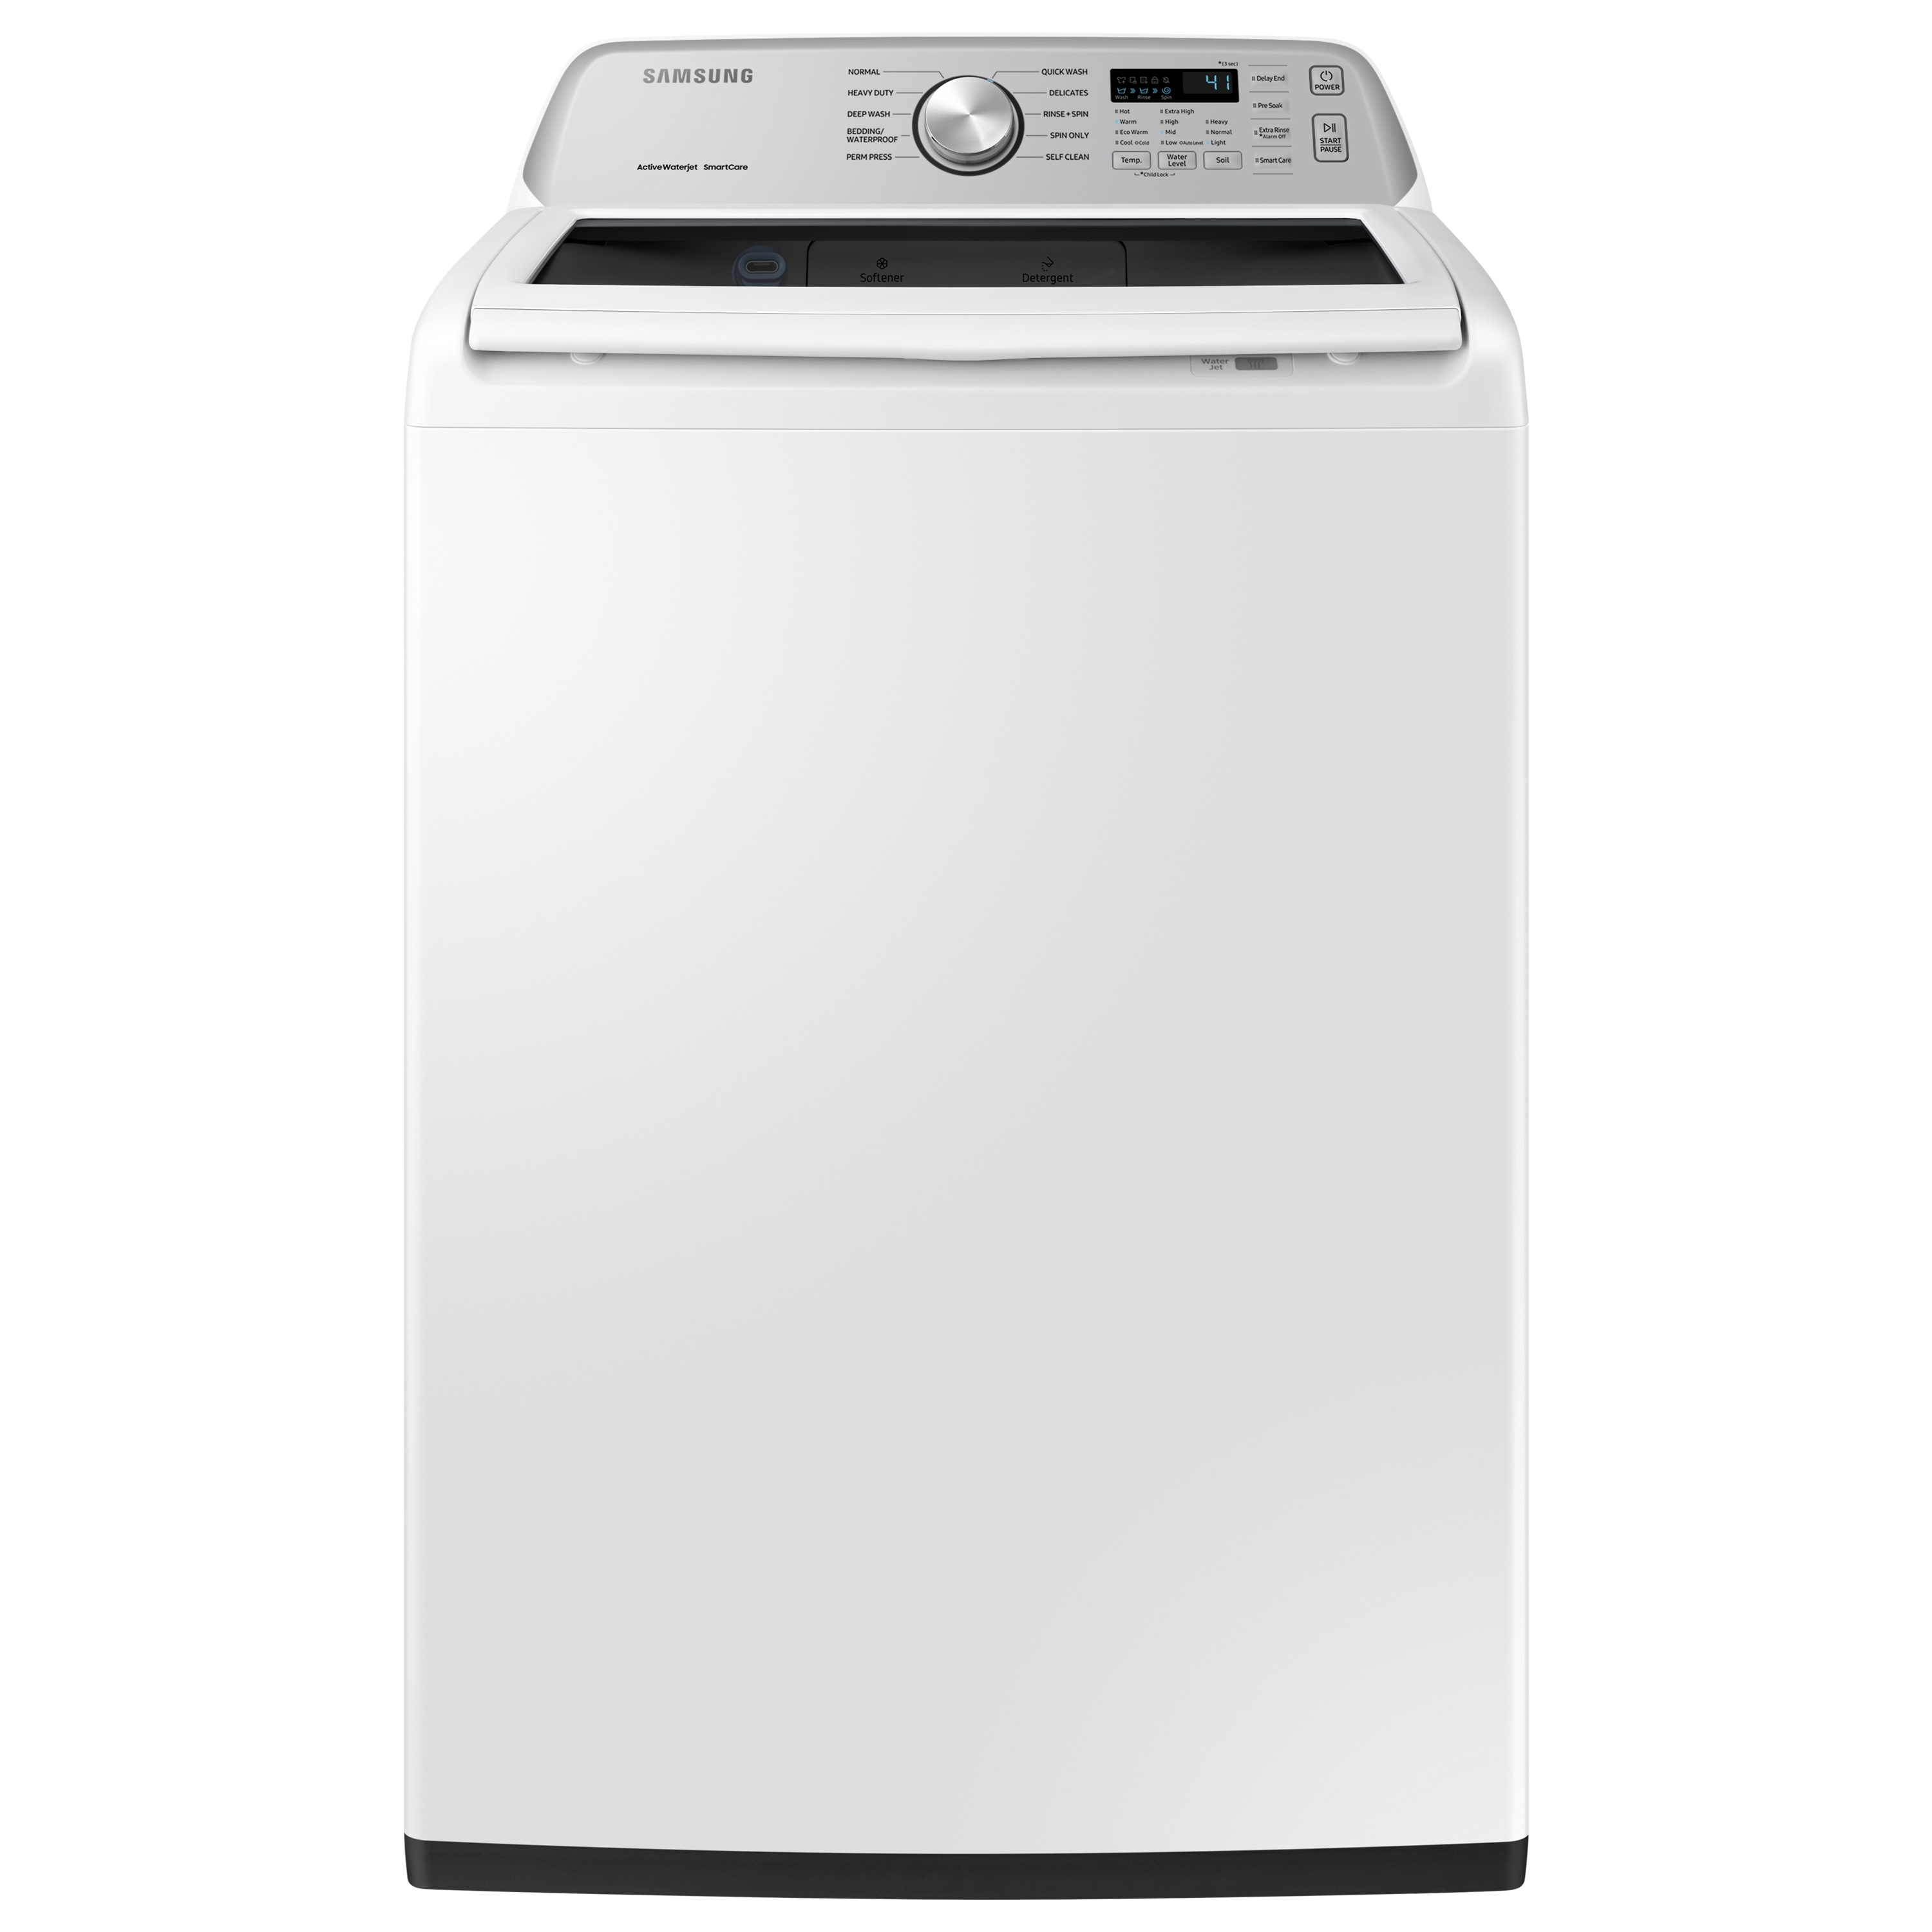 Samsung 4.5 cu. ft. Capacity Top Load Washer with Active WaterJet in White(WA45T3400AW/A4)